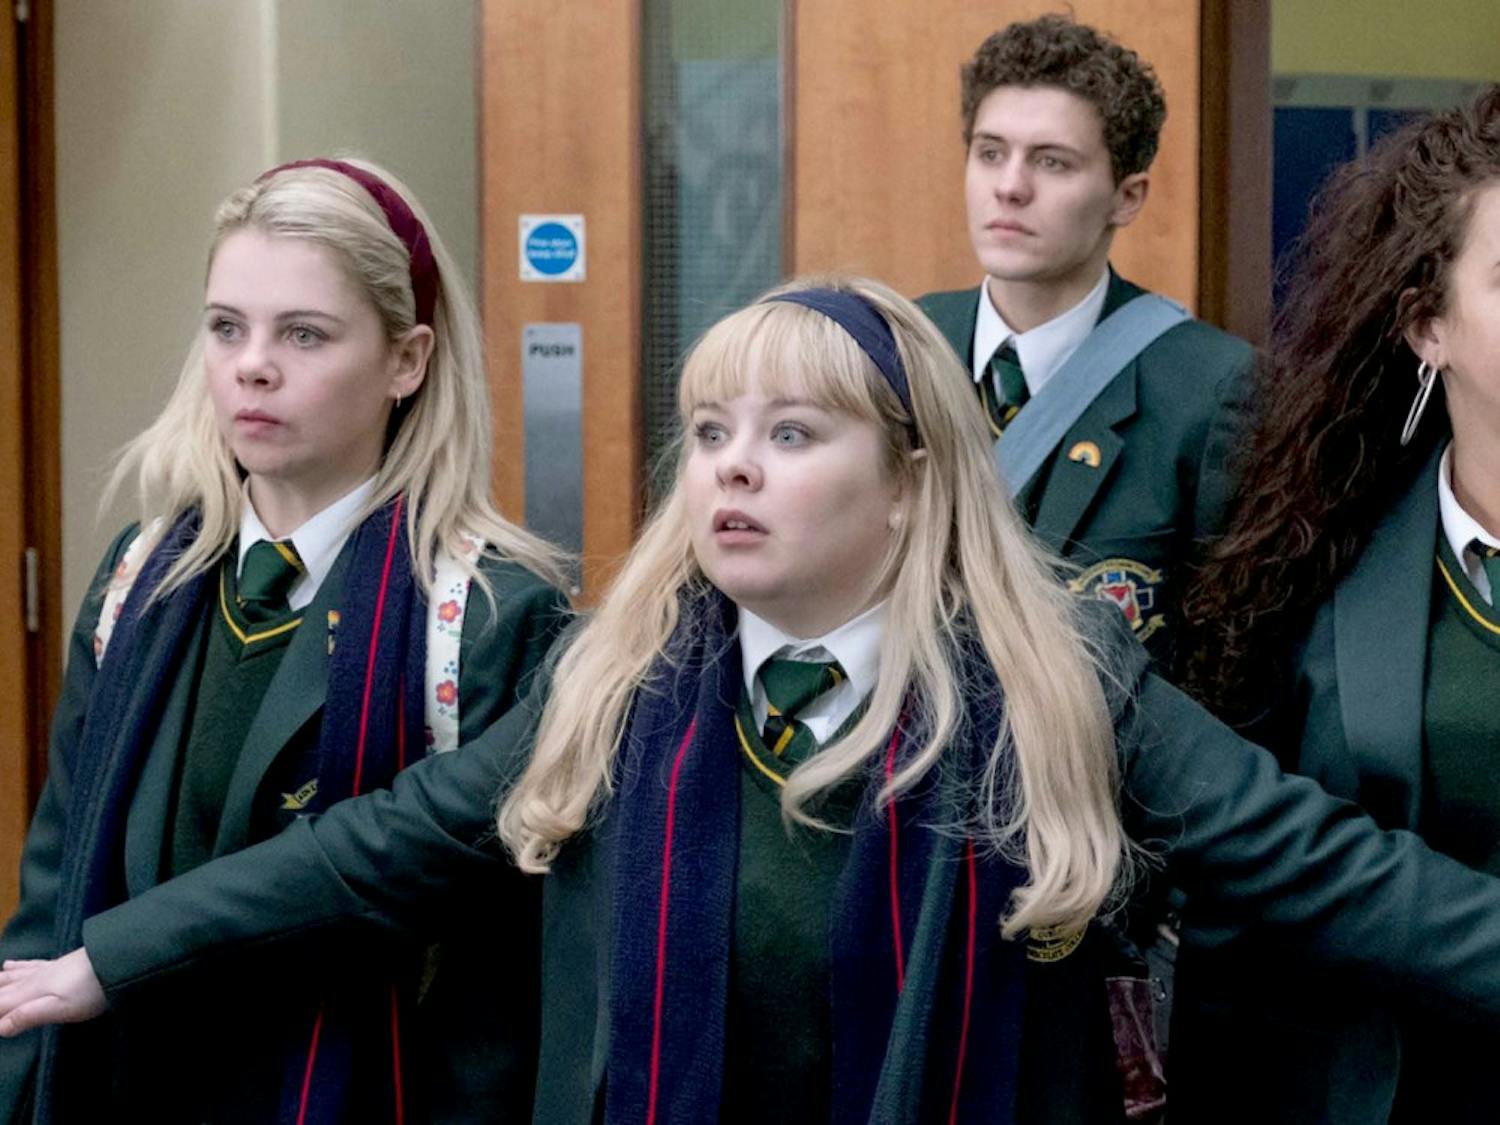 “Derry Girls,” which premiered in Jan. 2019, portrays the teenage experience with war-torn North Ireland as its backdrop.